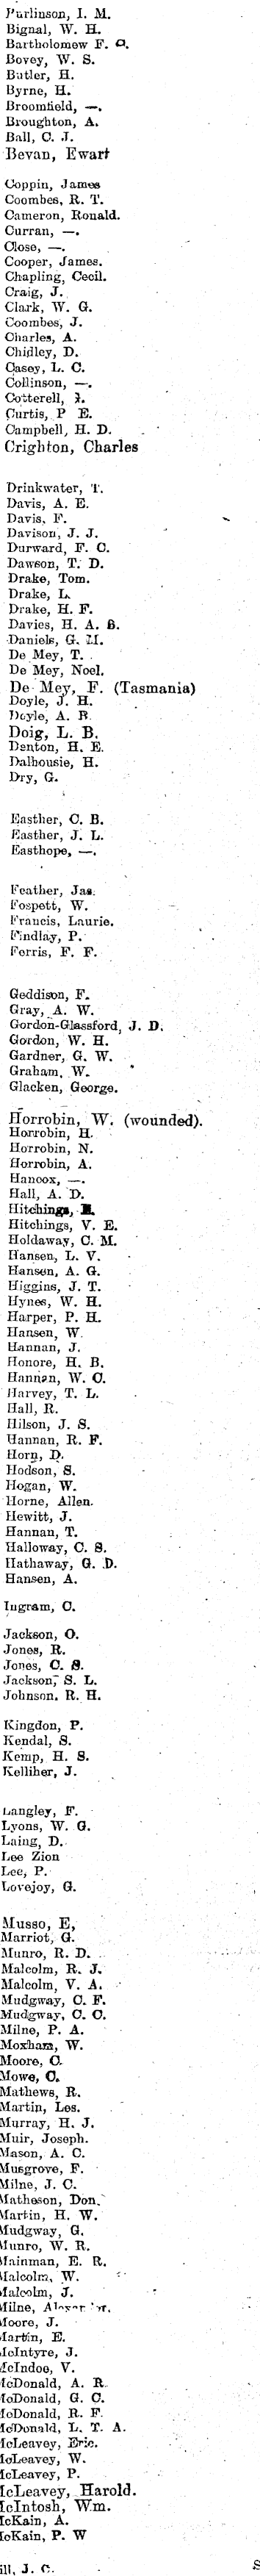 Papers Past Newspapers Horowhenua Chronicle 14 September 1918 For Home And Country